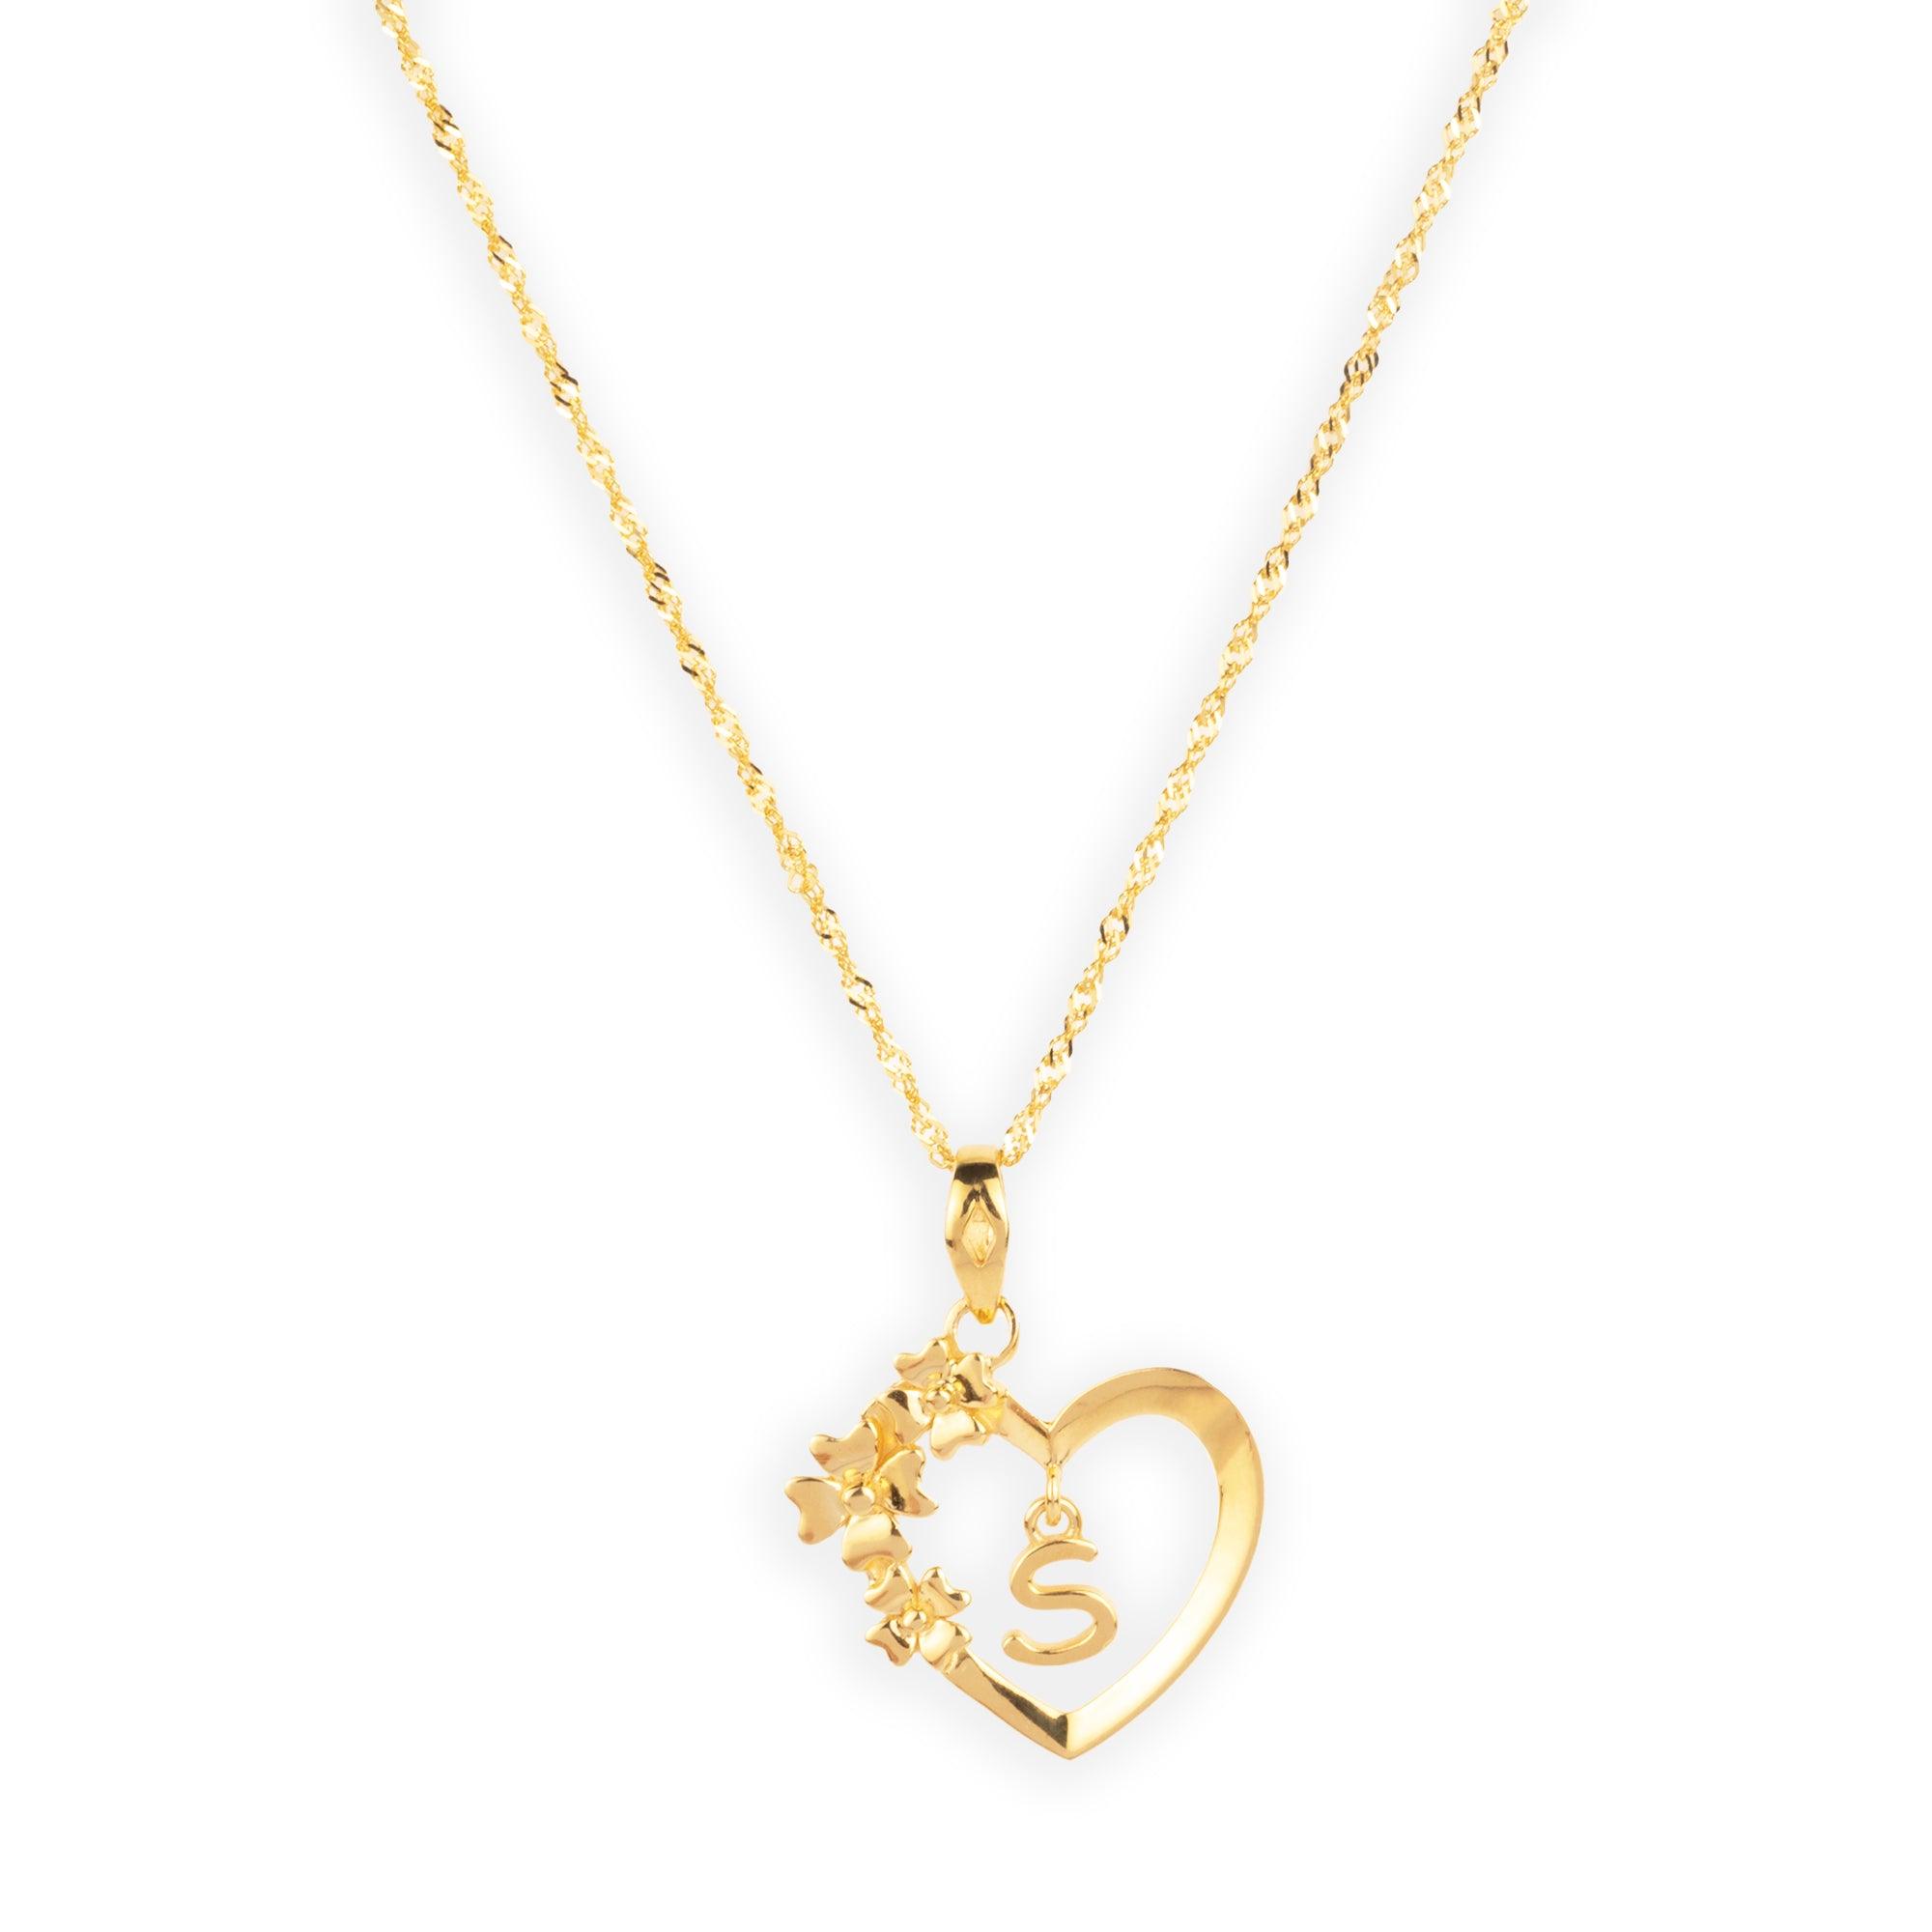 'S' 22ct Gold Heart Shape Initial Pendant with Flower Design P-7035-S - Minar Jewellers